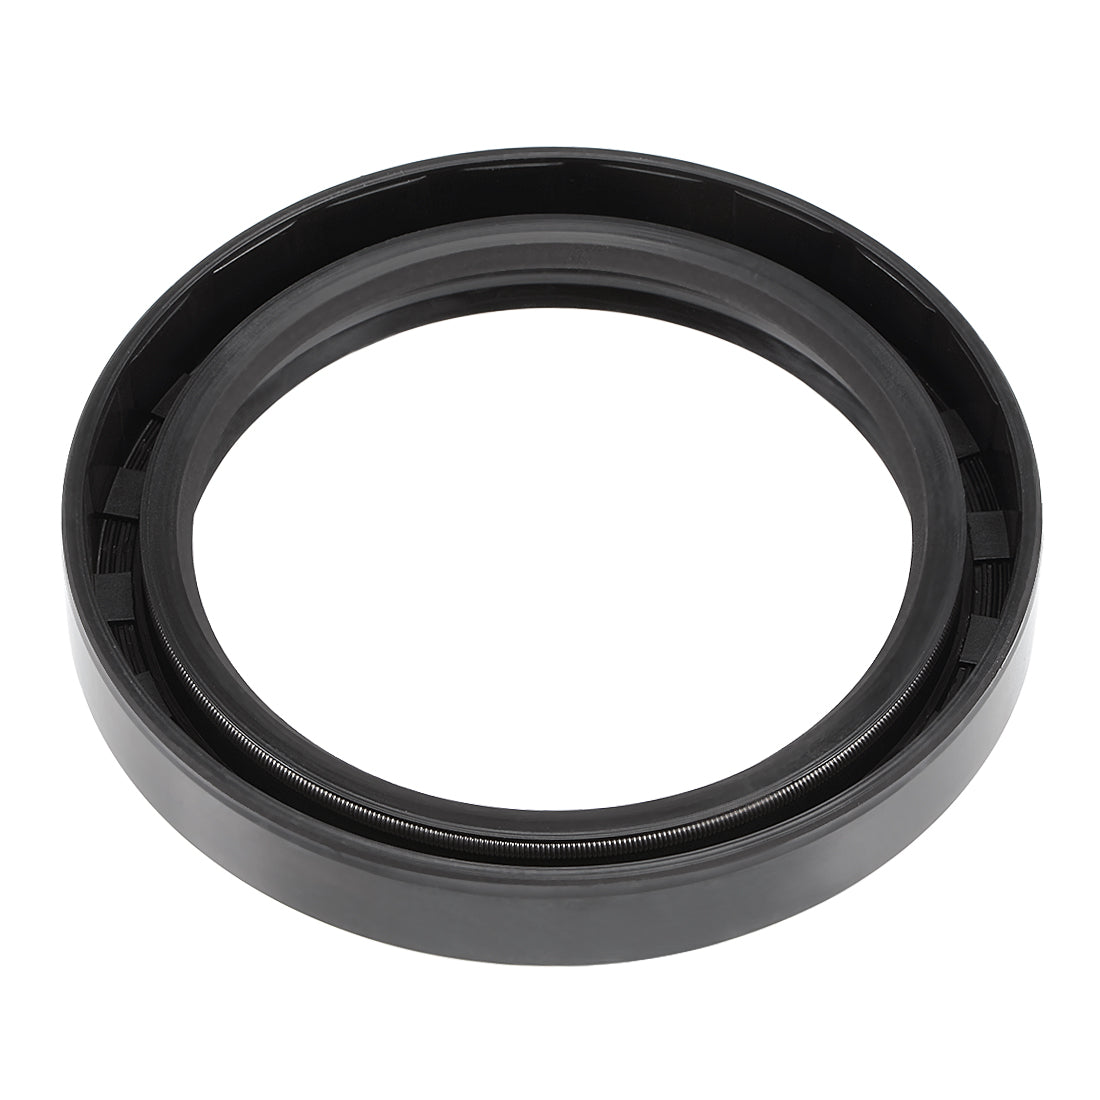 Uxcell Uxcell Oil Seal, TC 55mm x 72mm x 12mm, Nitrile Rubber Cover Double Lip